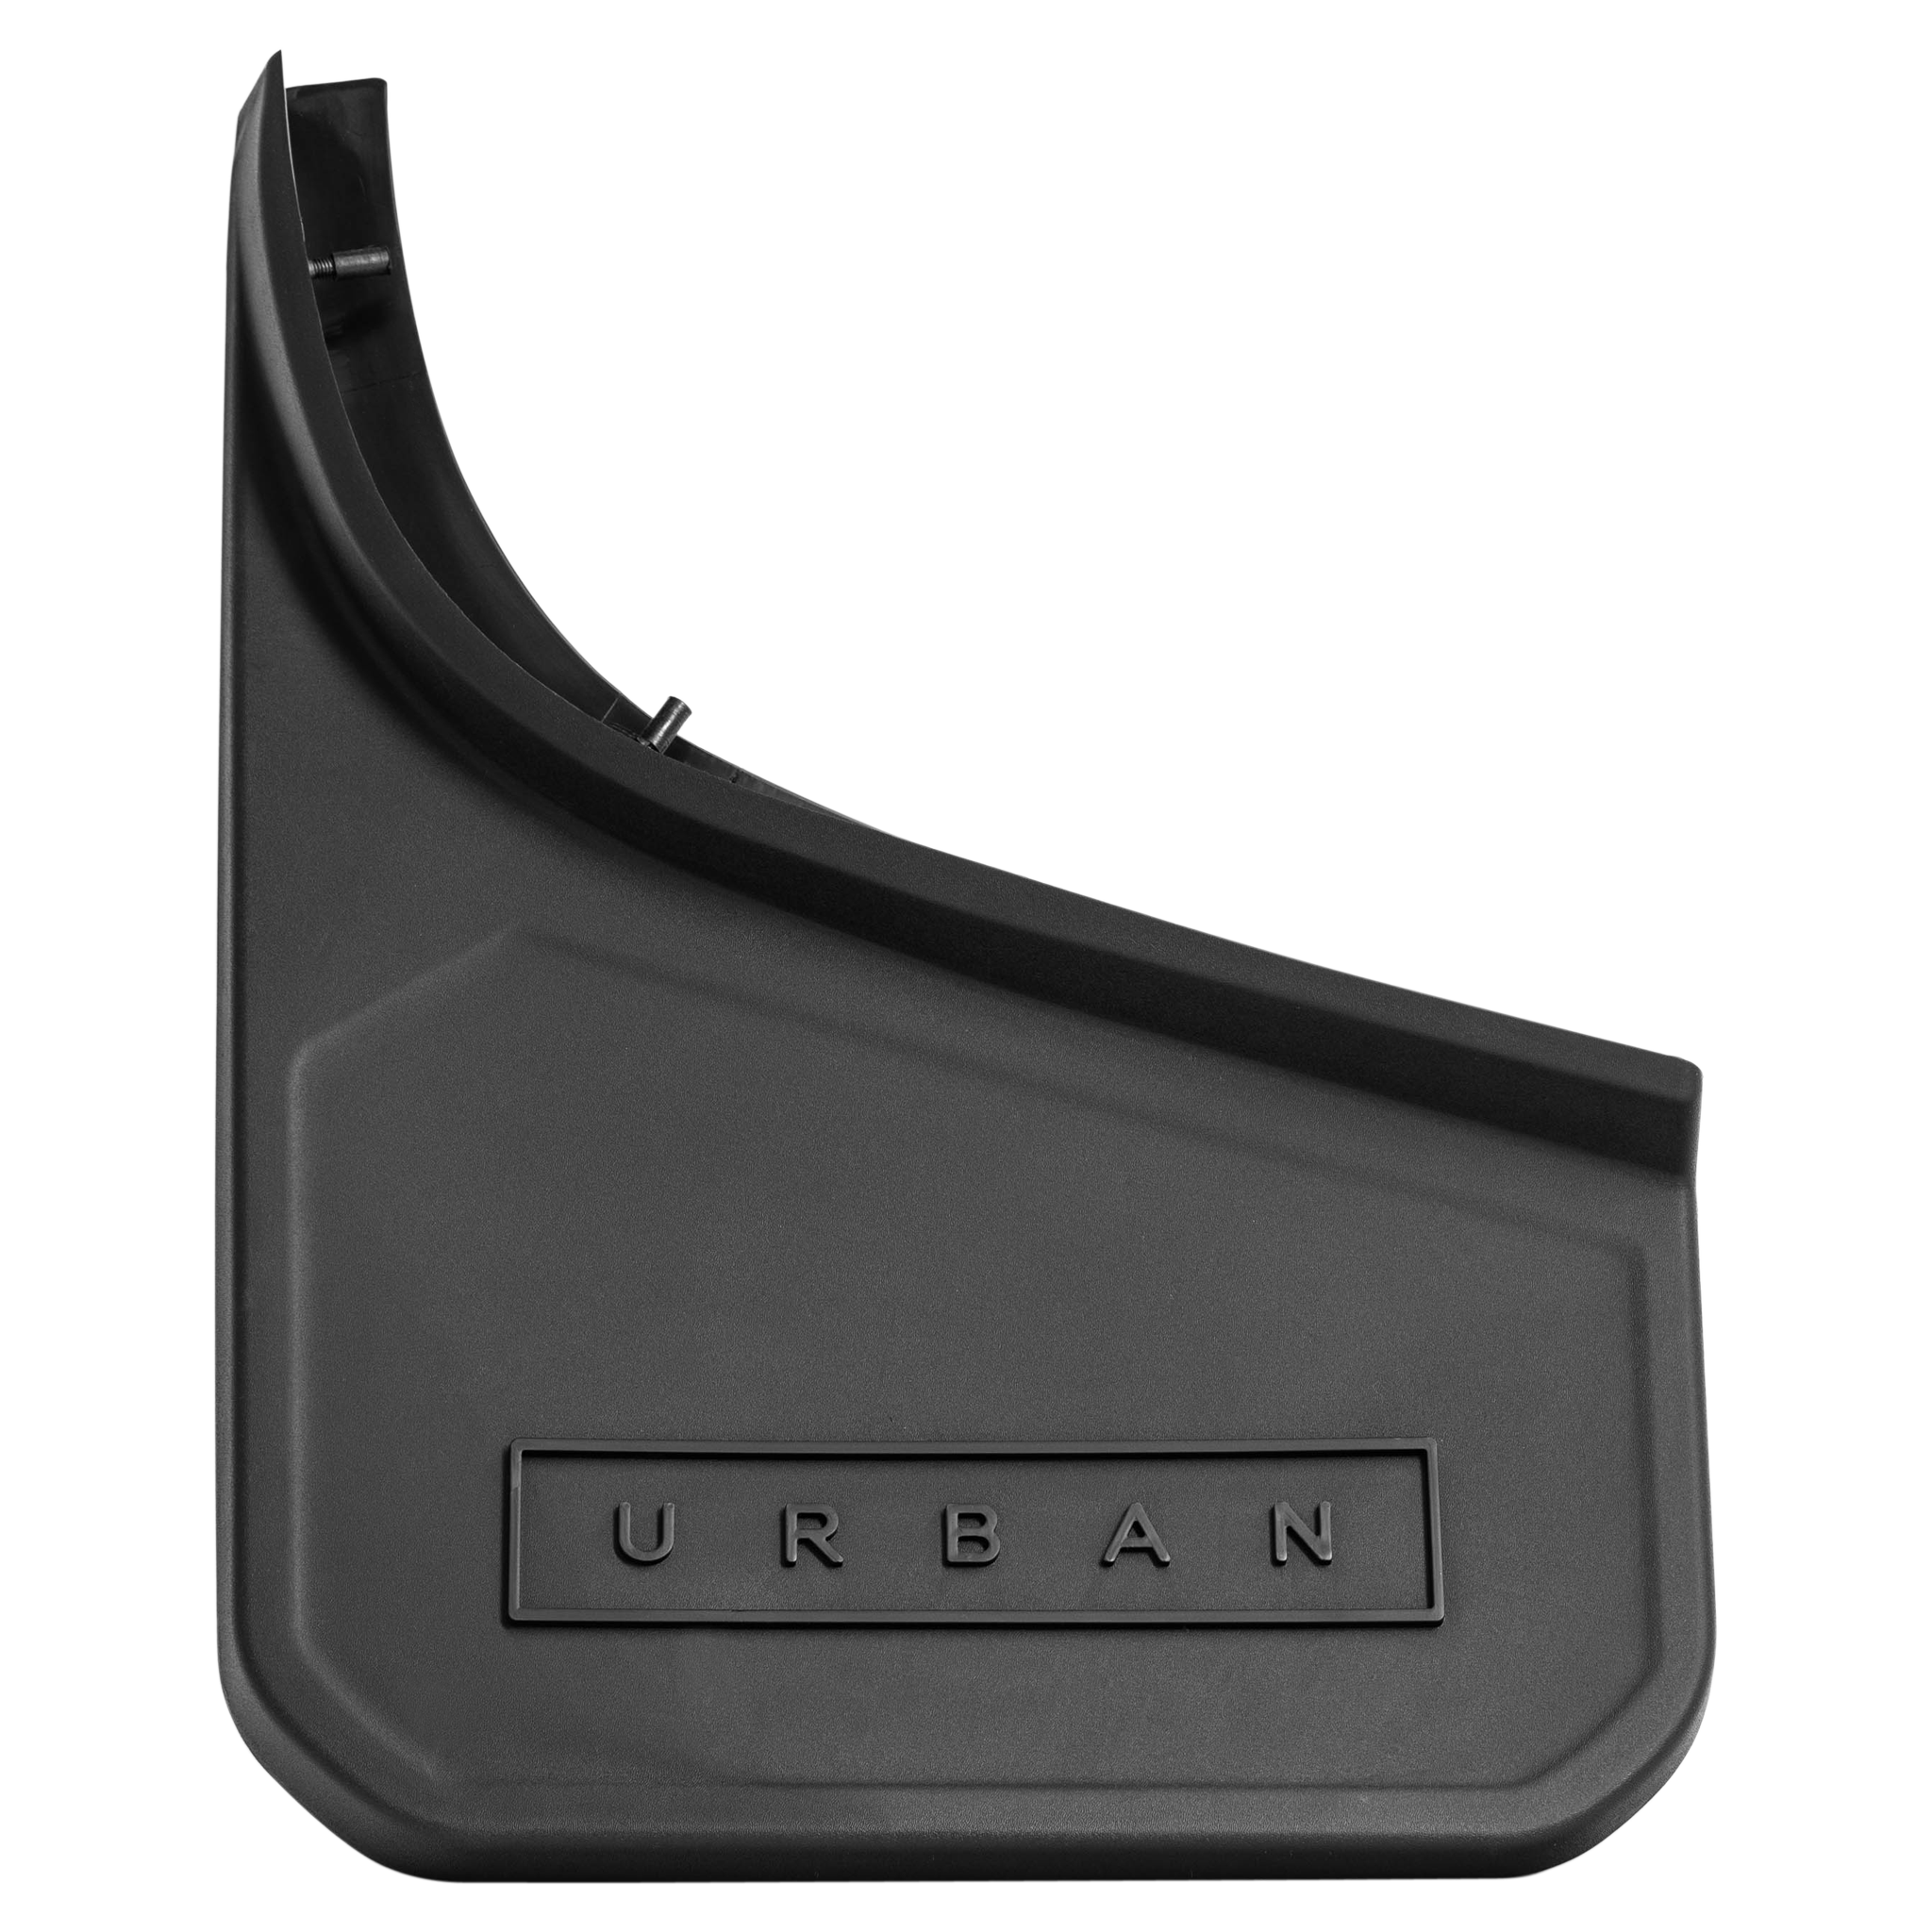 Urban Branded Mudflaps for New Land Rover Defender (Front & Rear)